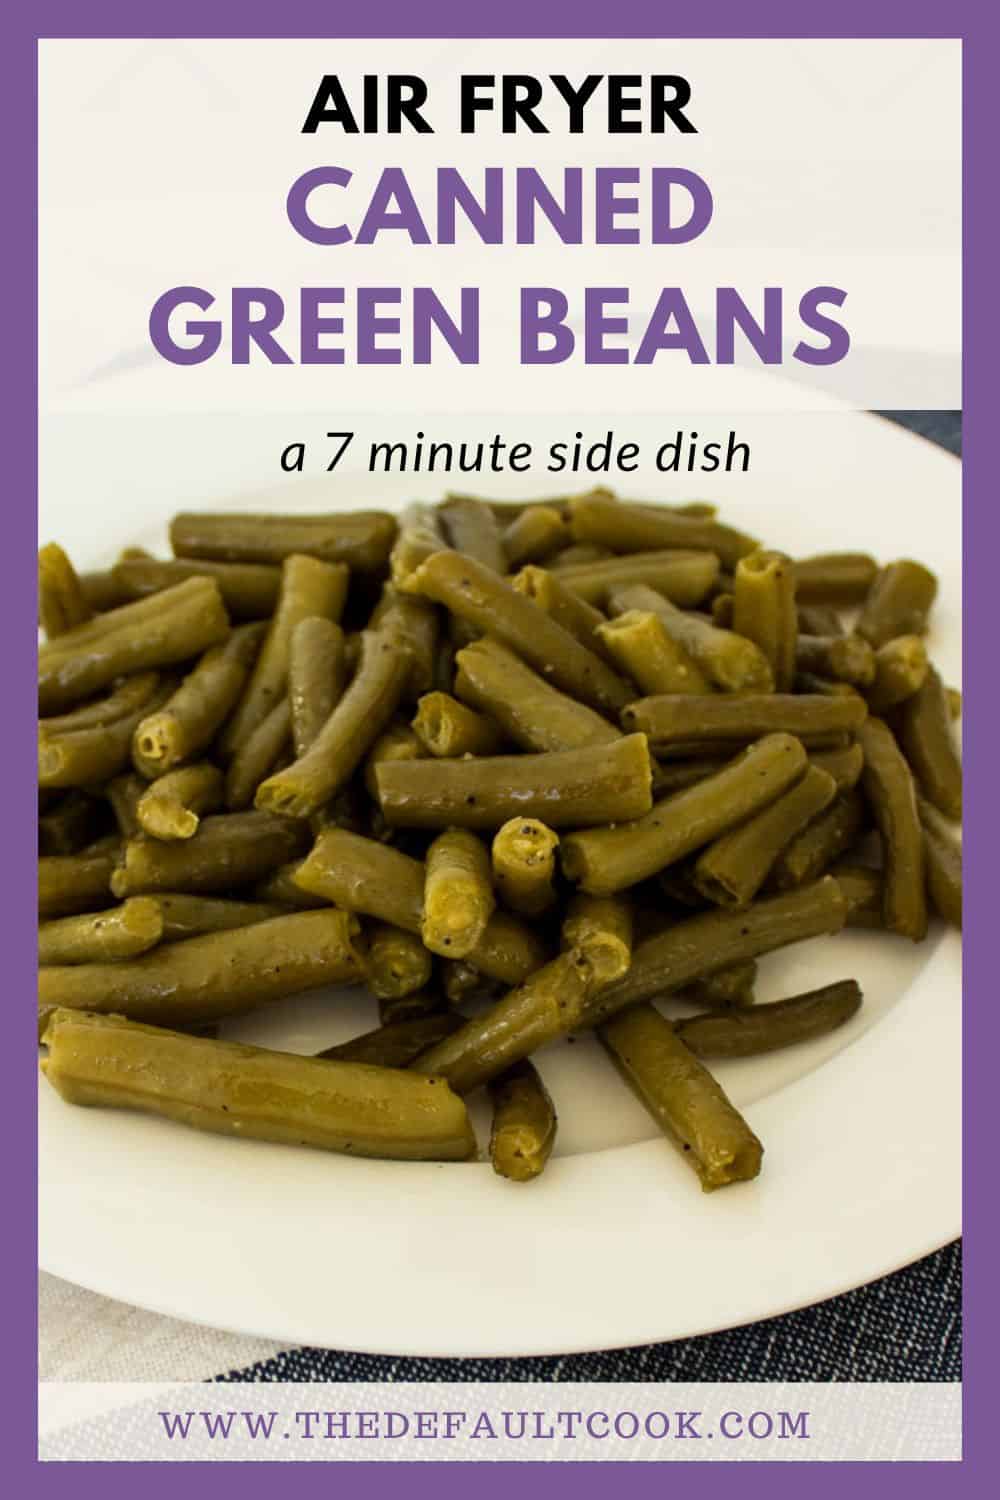 Cooked, seasoned green beans on a white plate with the name written above them.